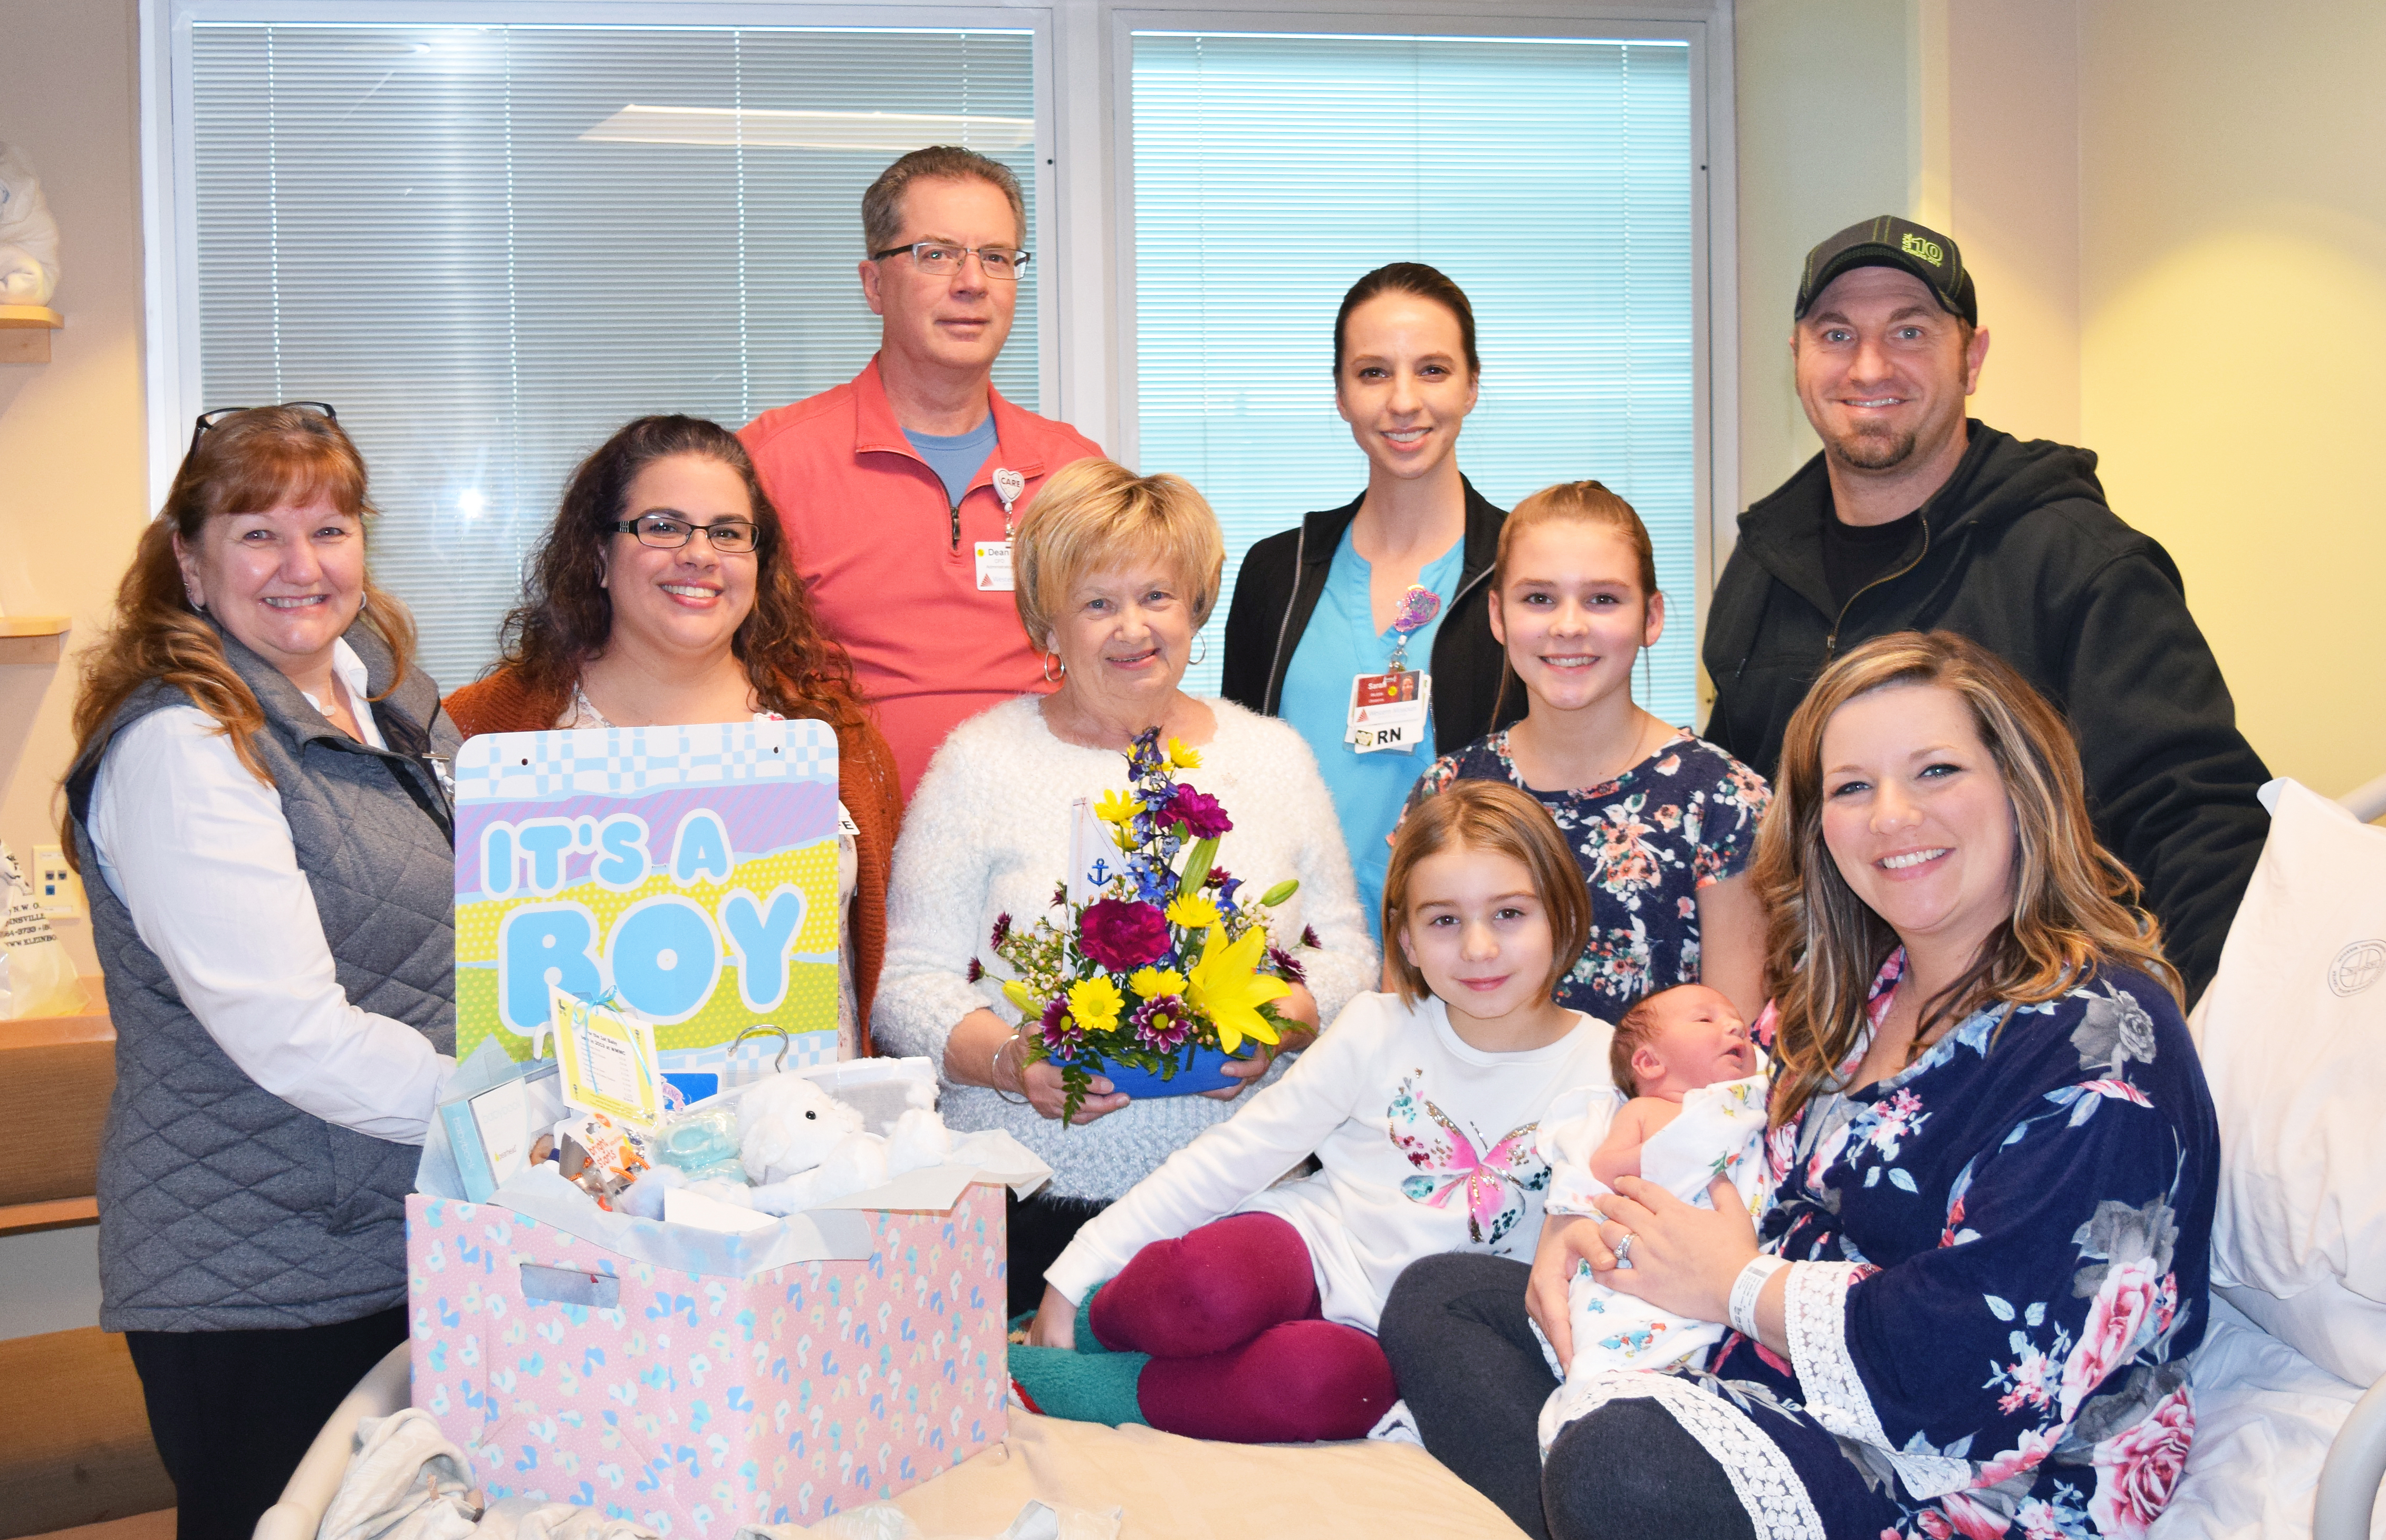 WMMC Welcomes First Baby of New Year!